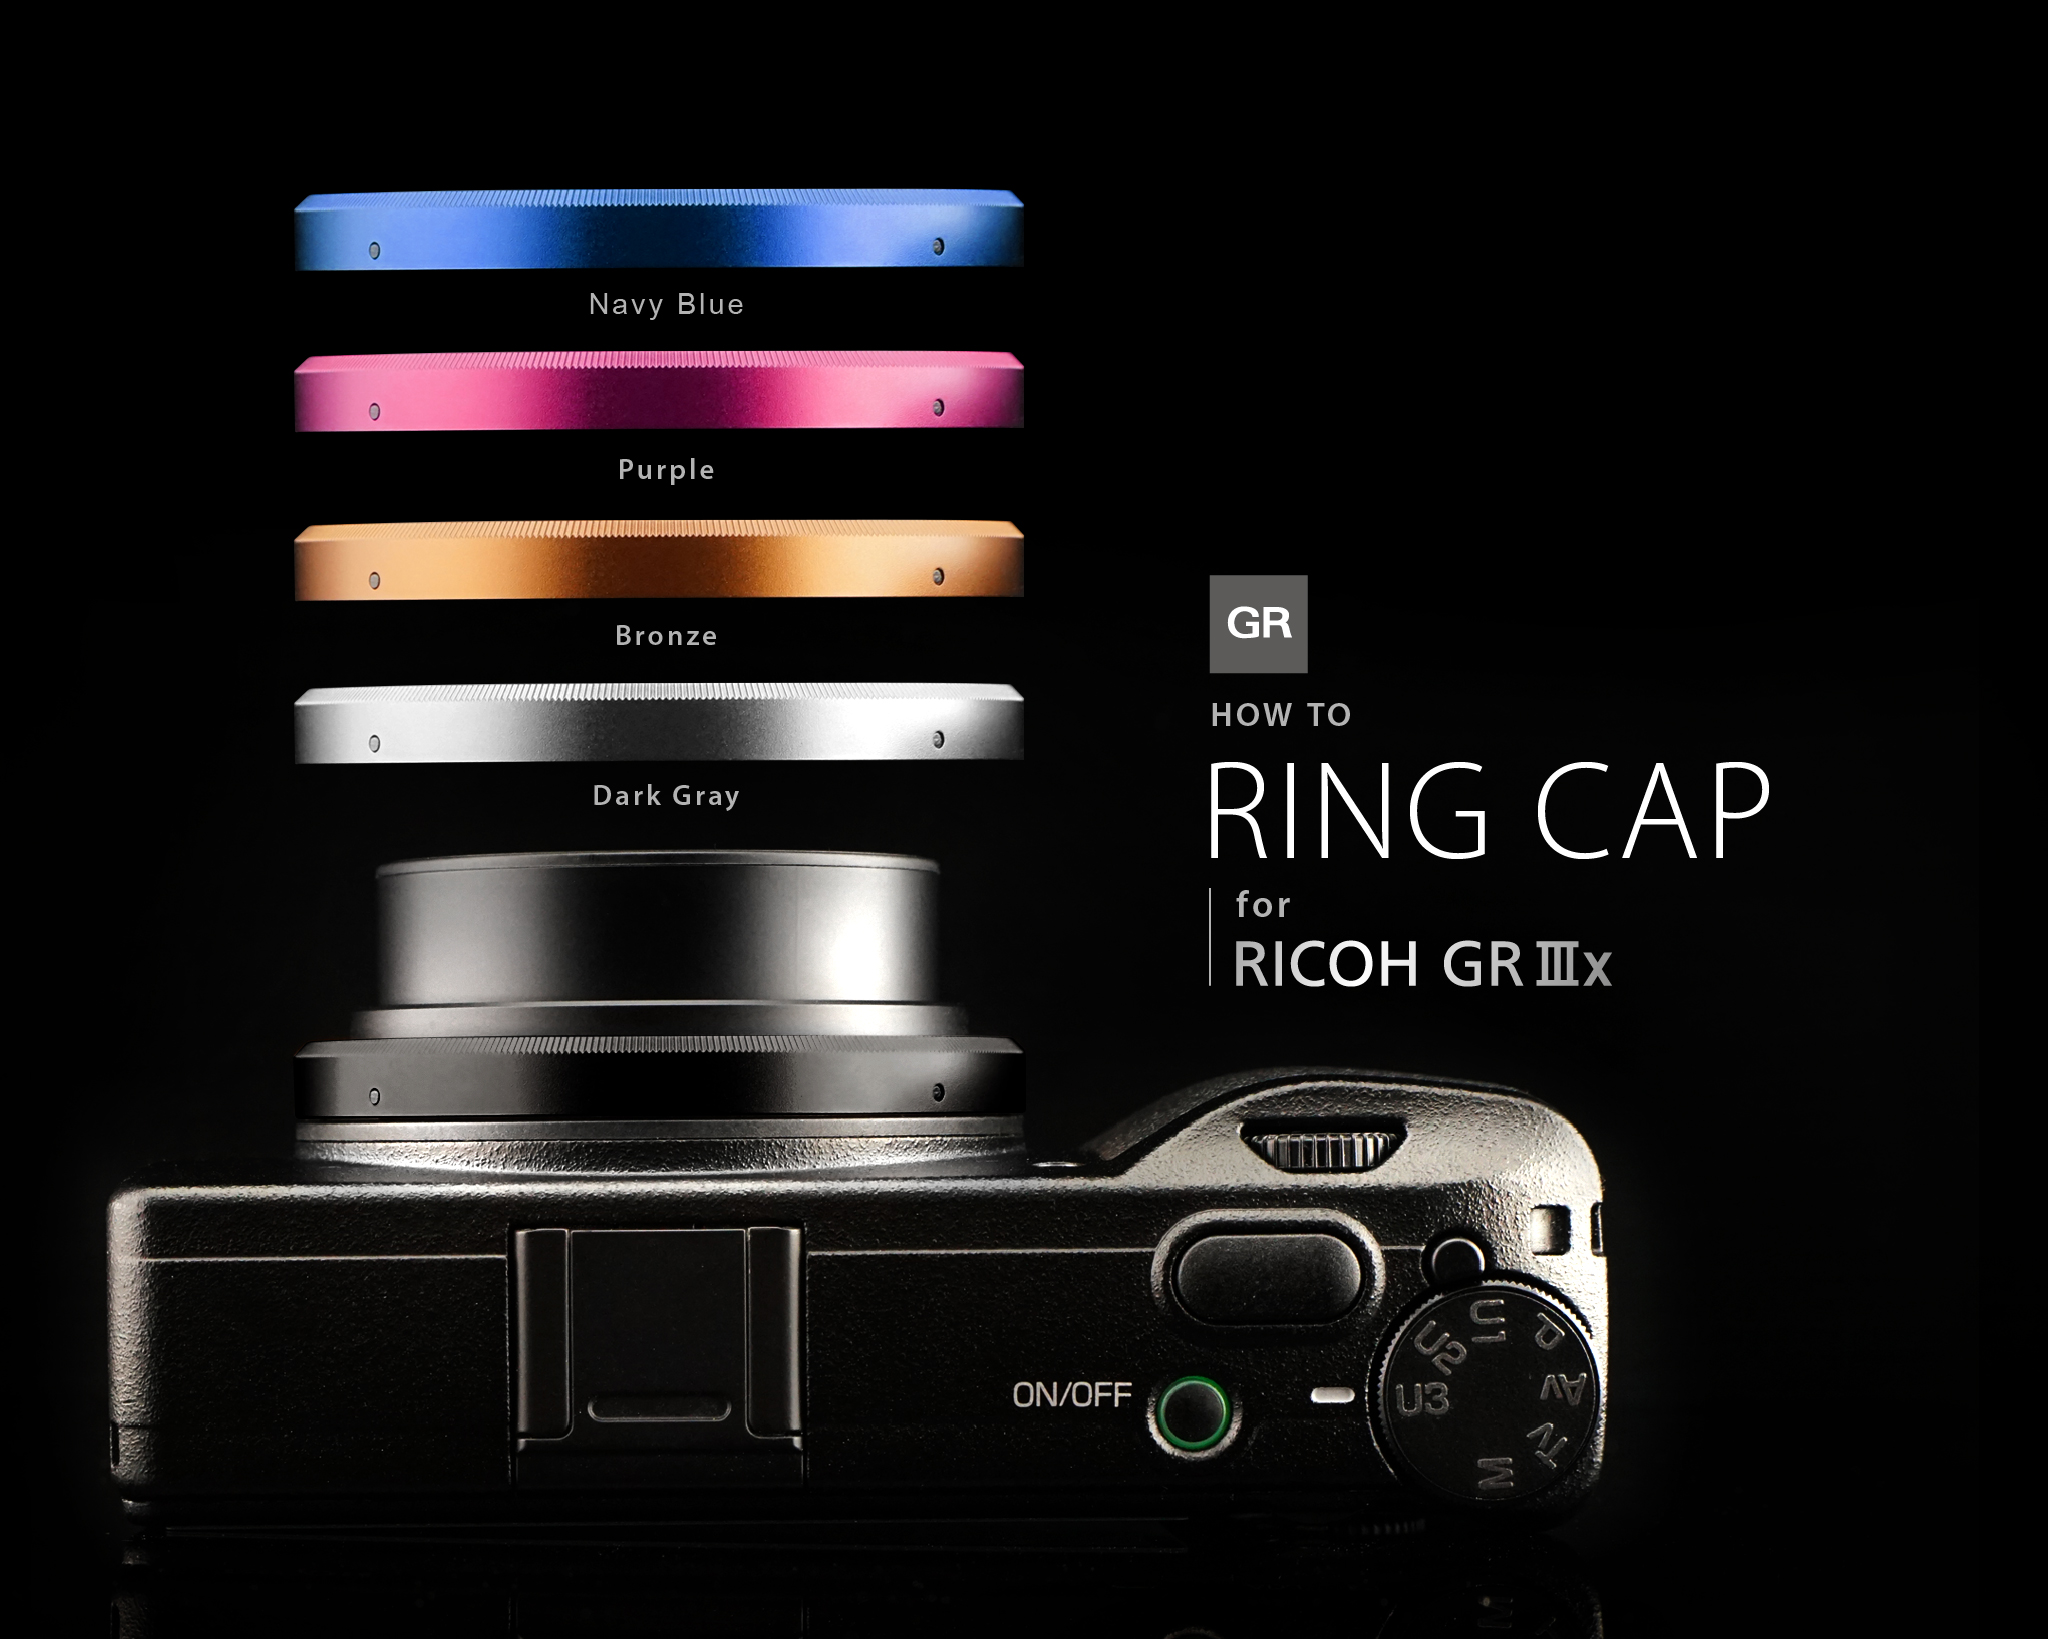 GR HOW TO : RING CAP for RICOH GR IIIx